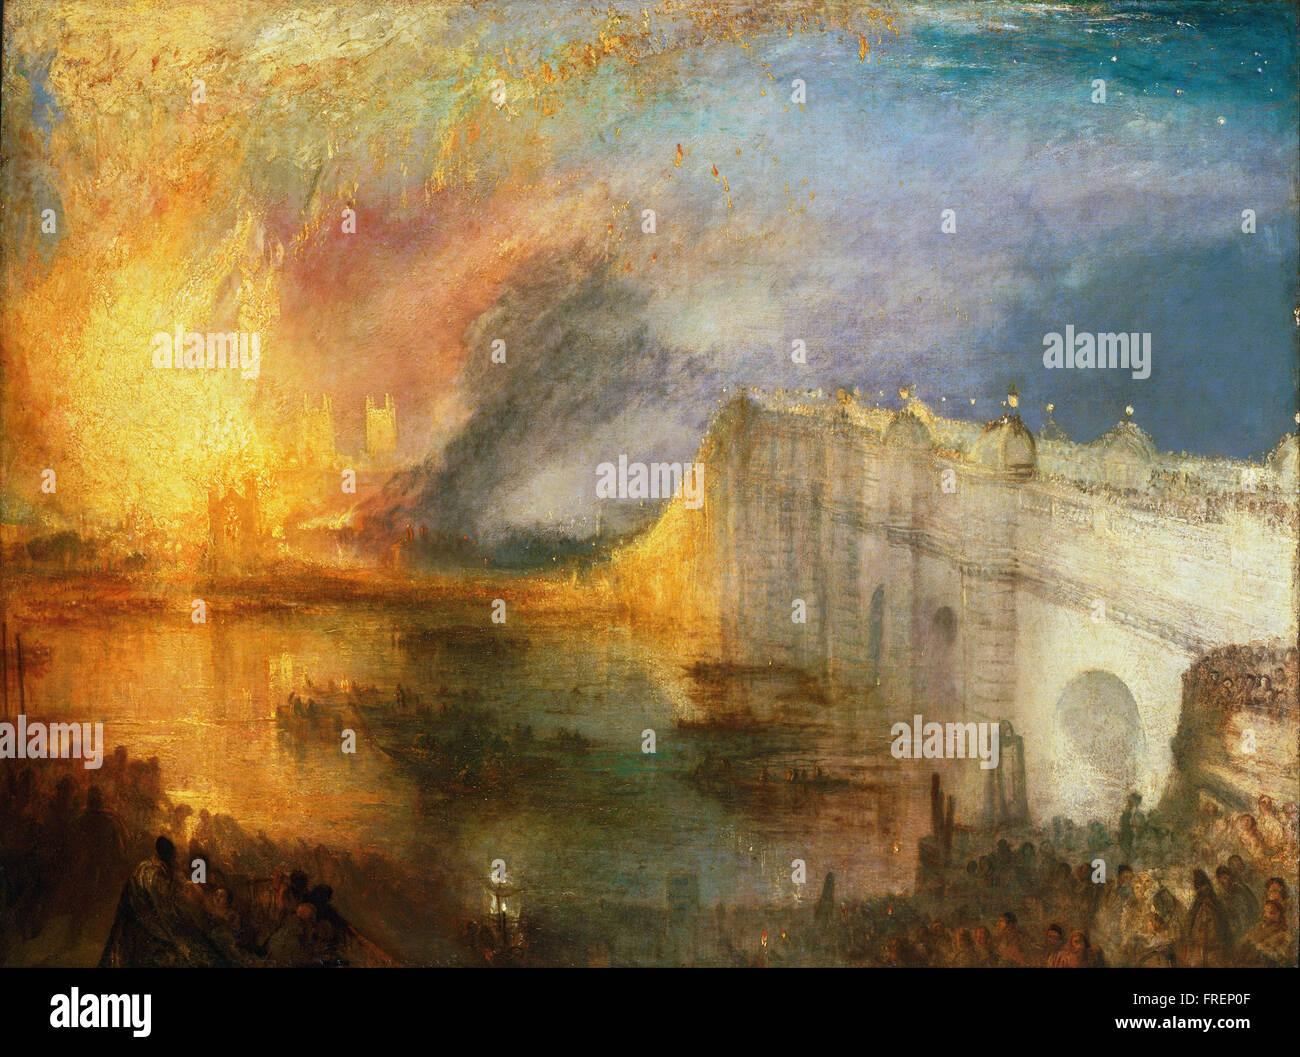 Joseph Mallord William Turner, English - The Burning of the Houses of Lords and Commons, October Stock Photo